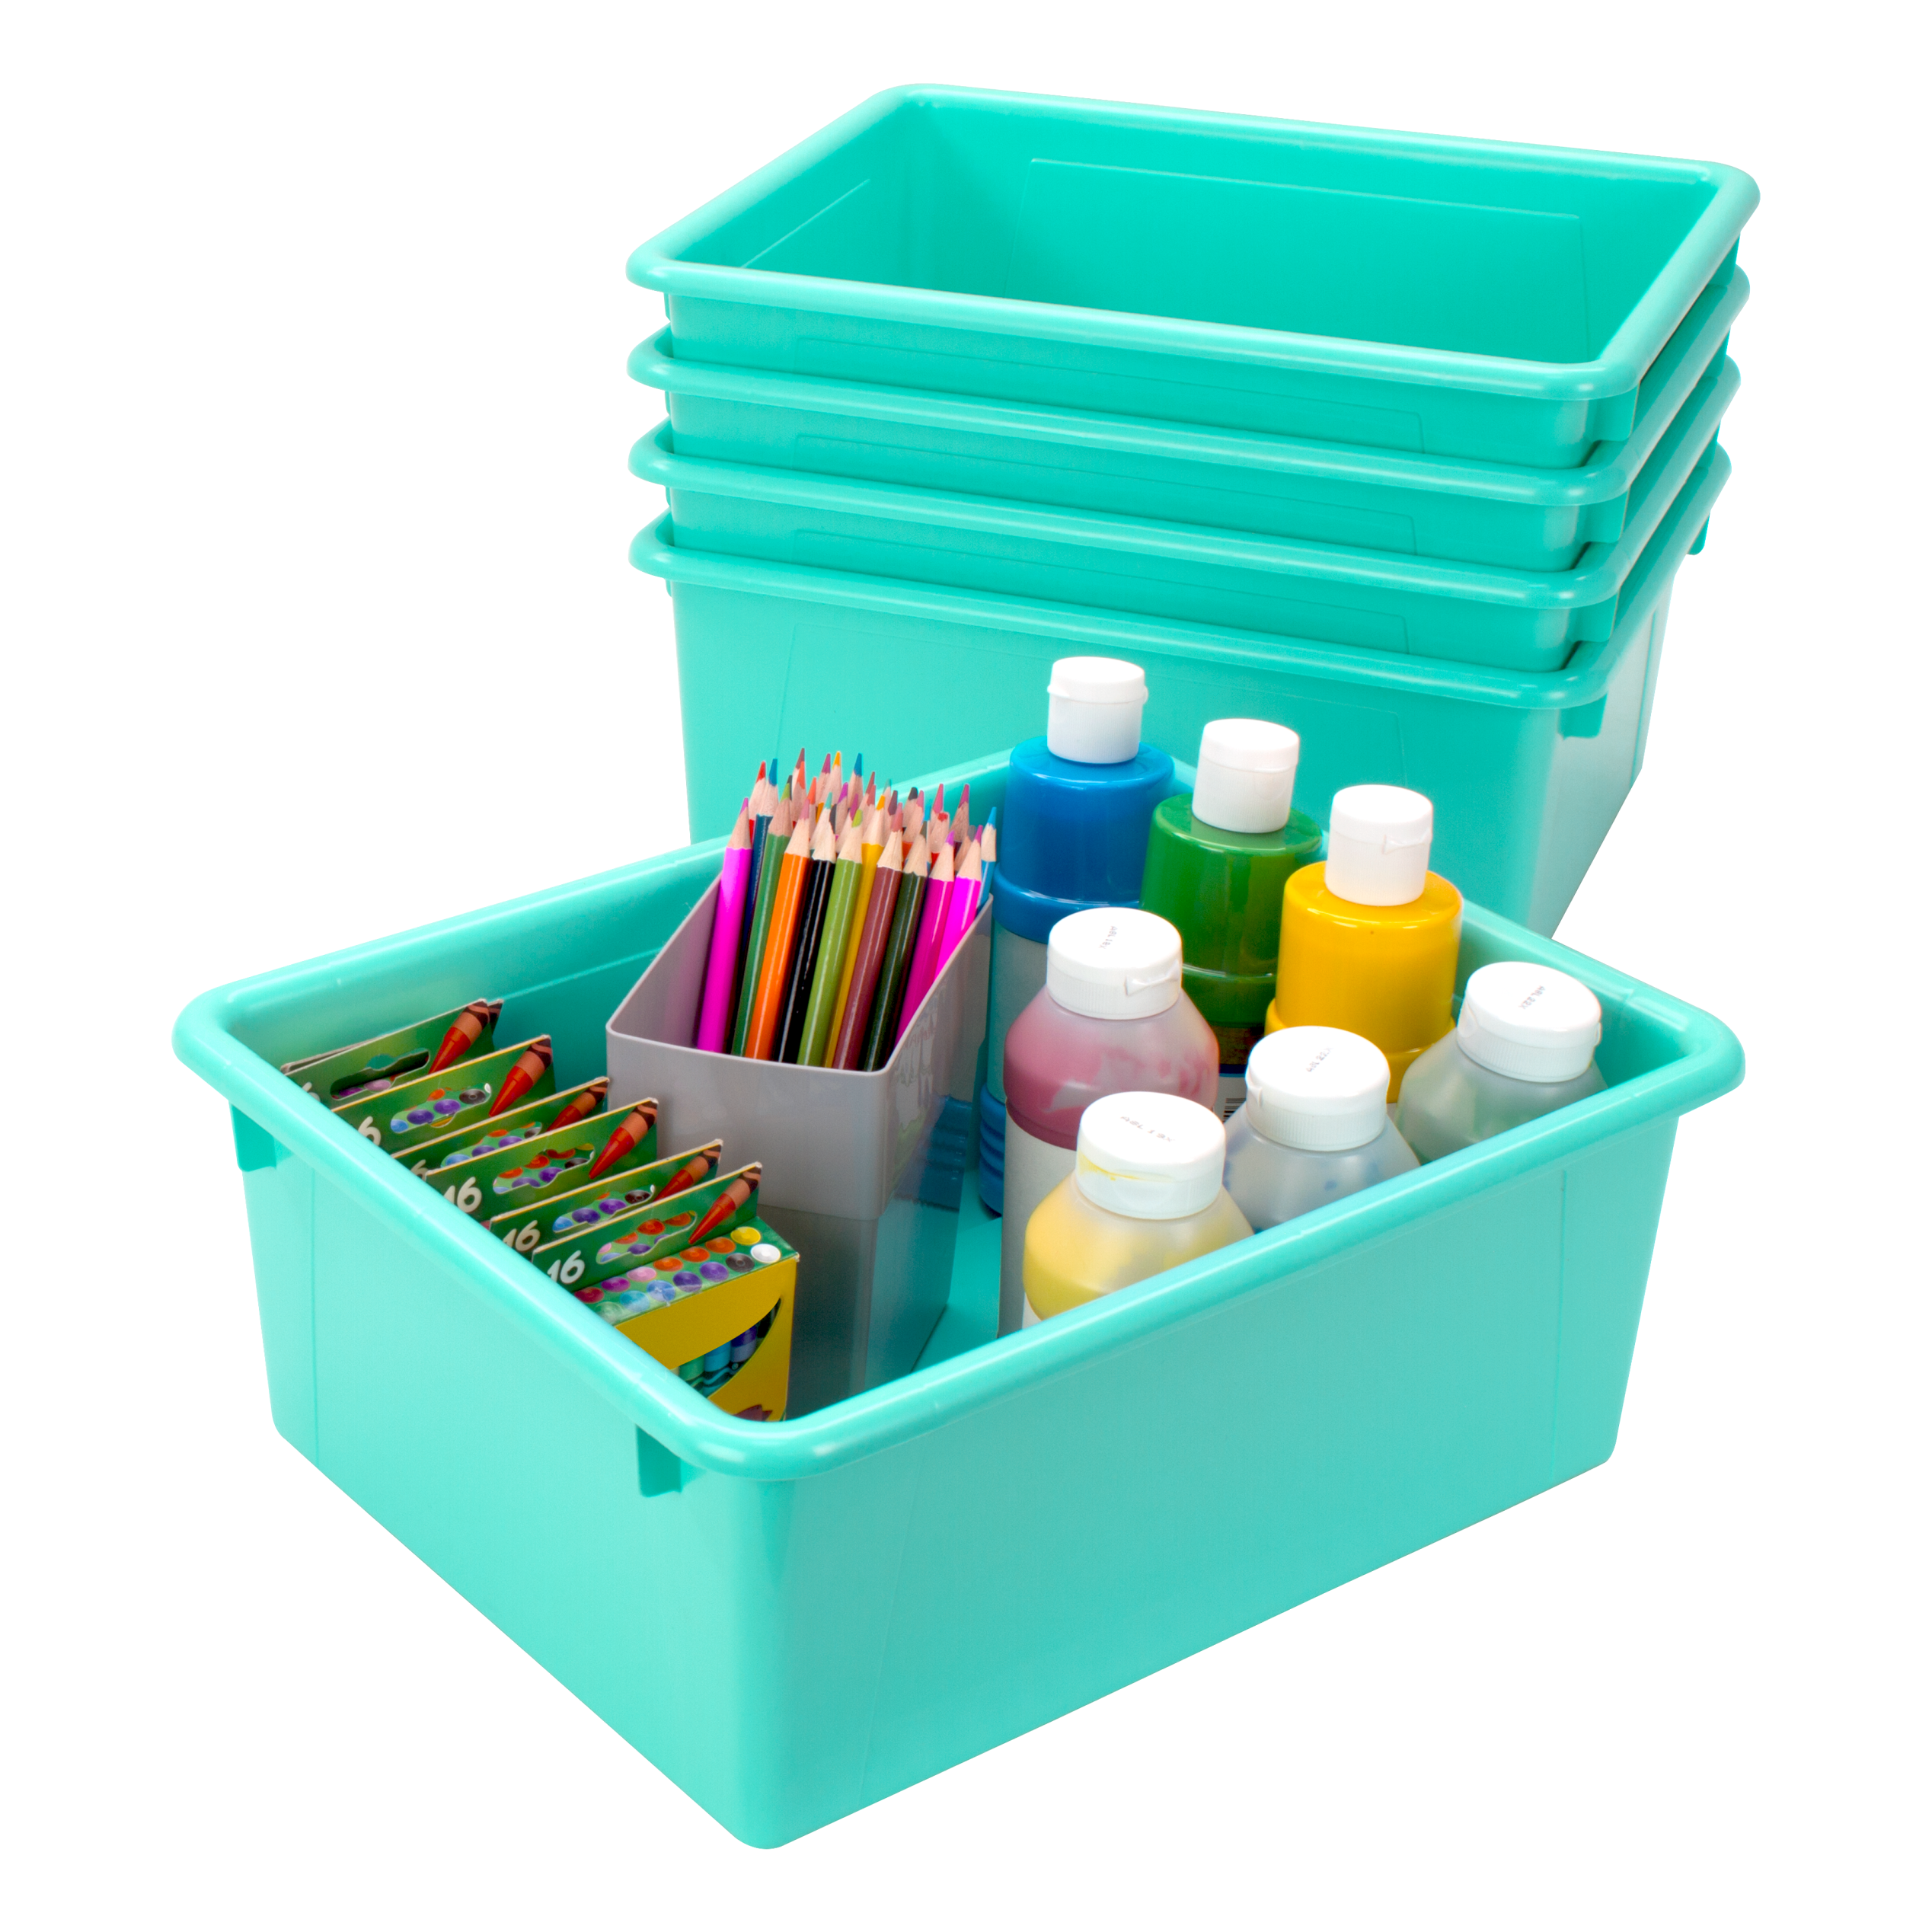 Storex Sorting and Crafts Tray, 8 x 9.5 Inches, Assorted Colors, 48-Pack